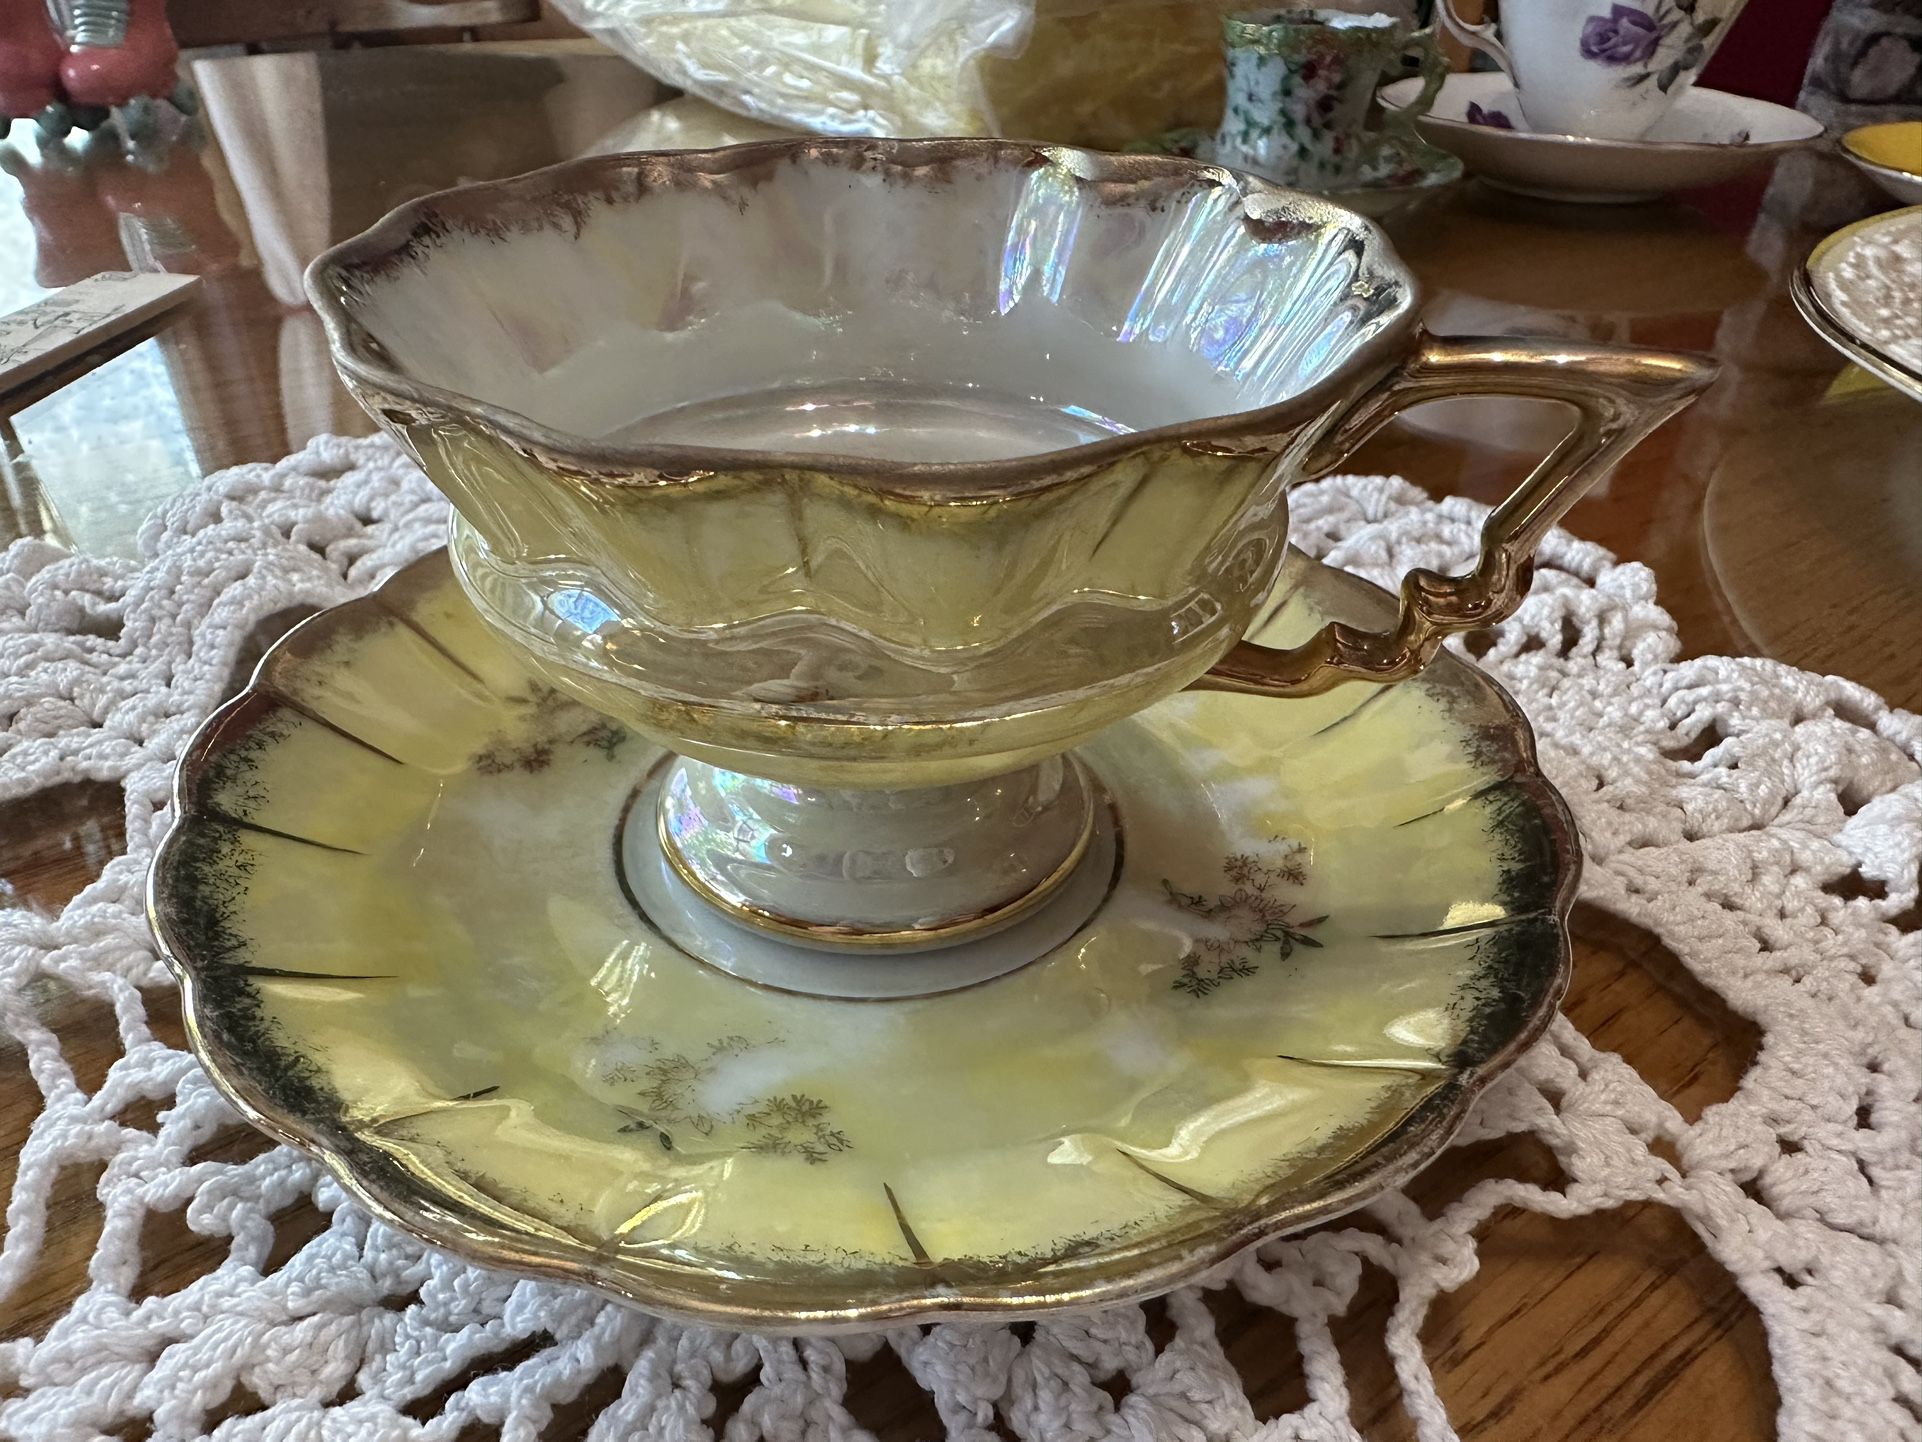 This Cup And Saucer Set Was Made In 1976 By Fan Crest Fine China Out Of Japan. It Is Handpainted.